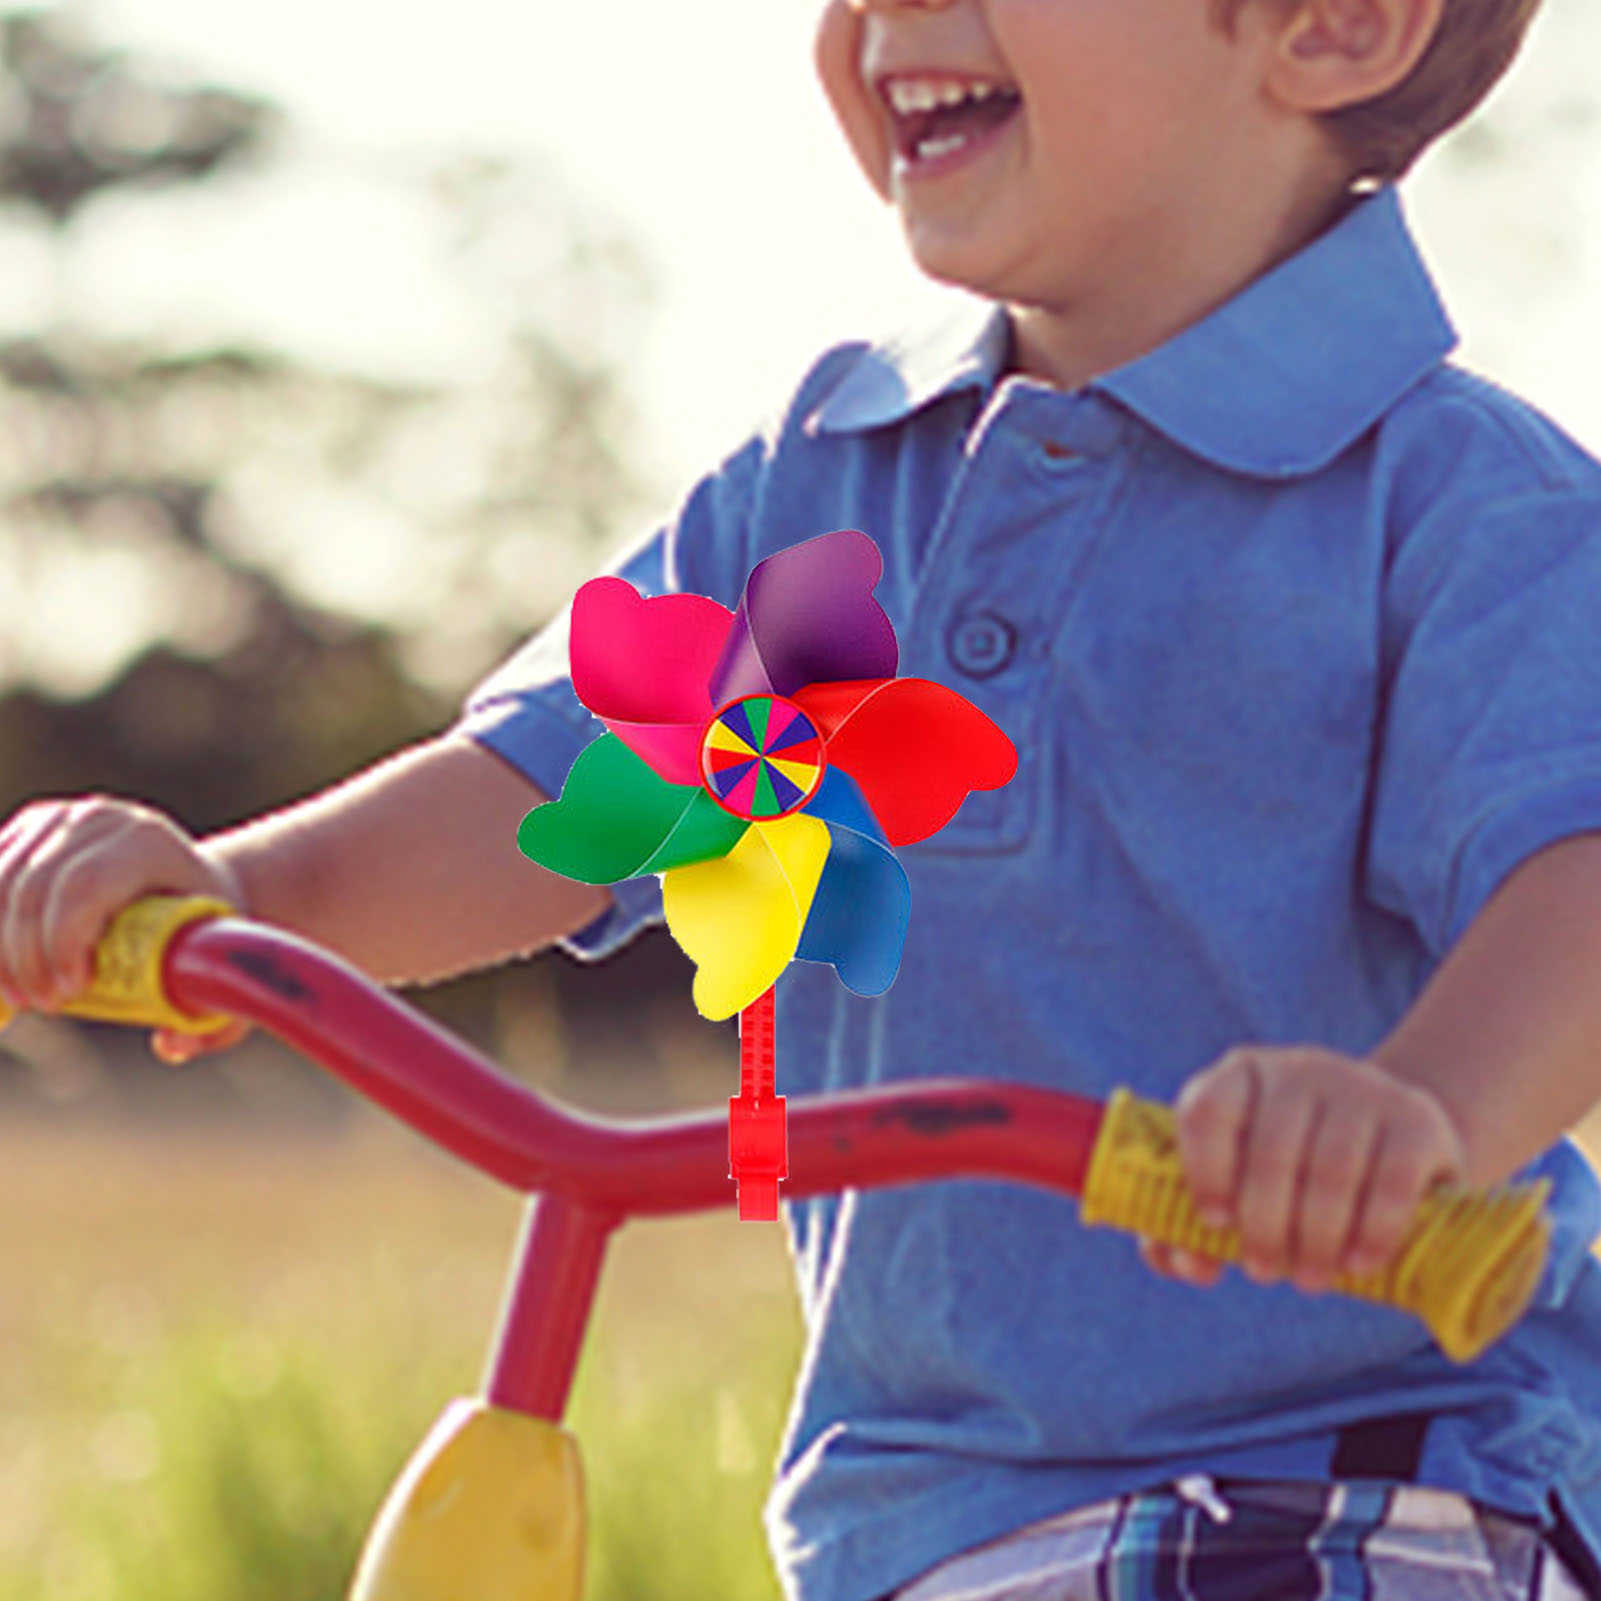 New Cute Children Bike Handlebar Flower Pinwheel Windmill Decoration For Kid'S Bicycle Scooter Cycling Accessories